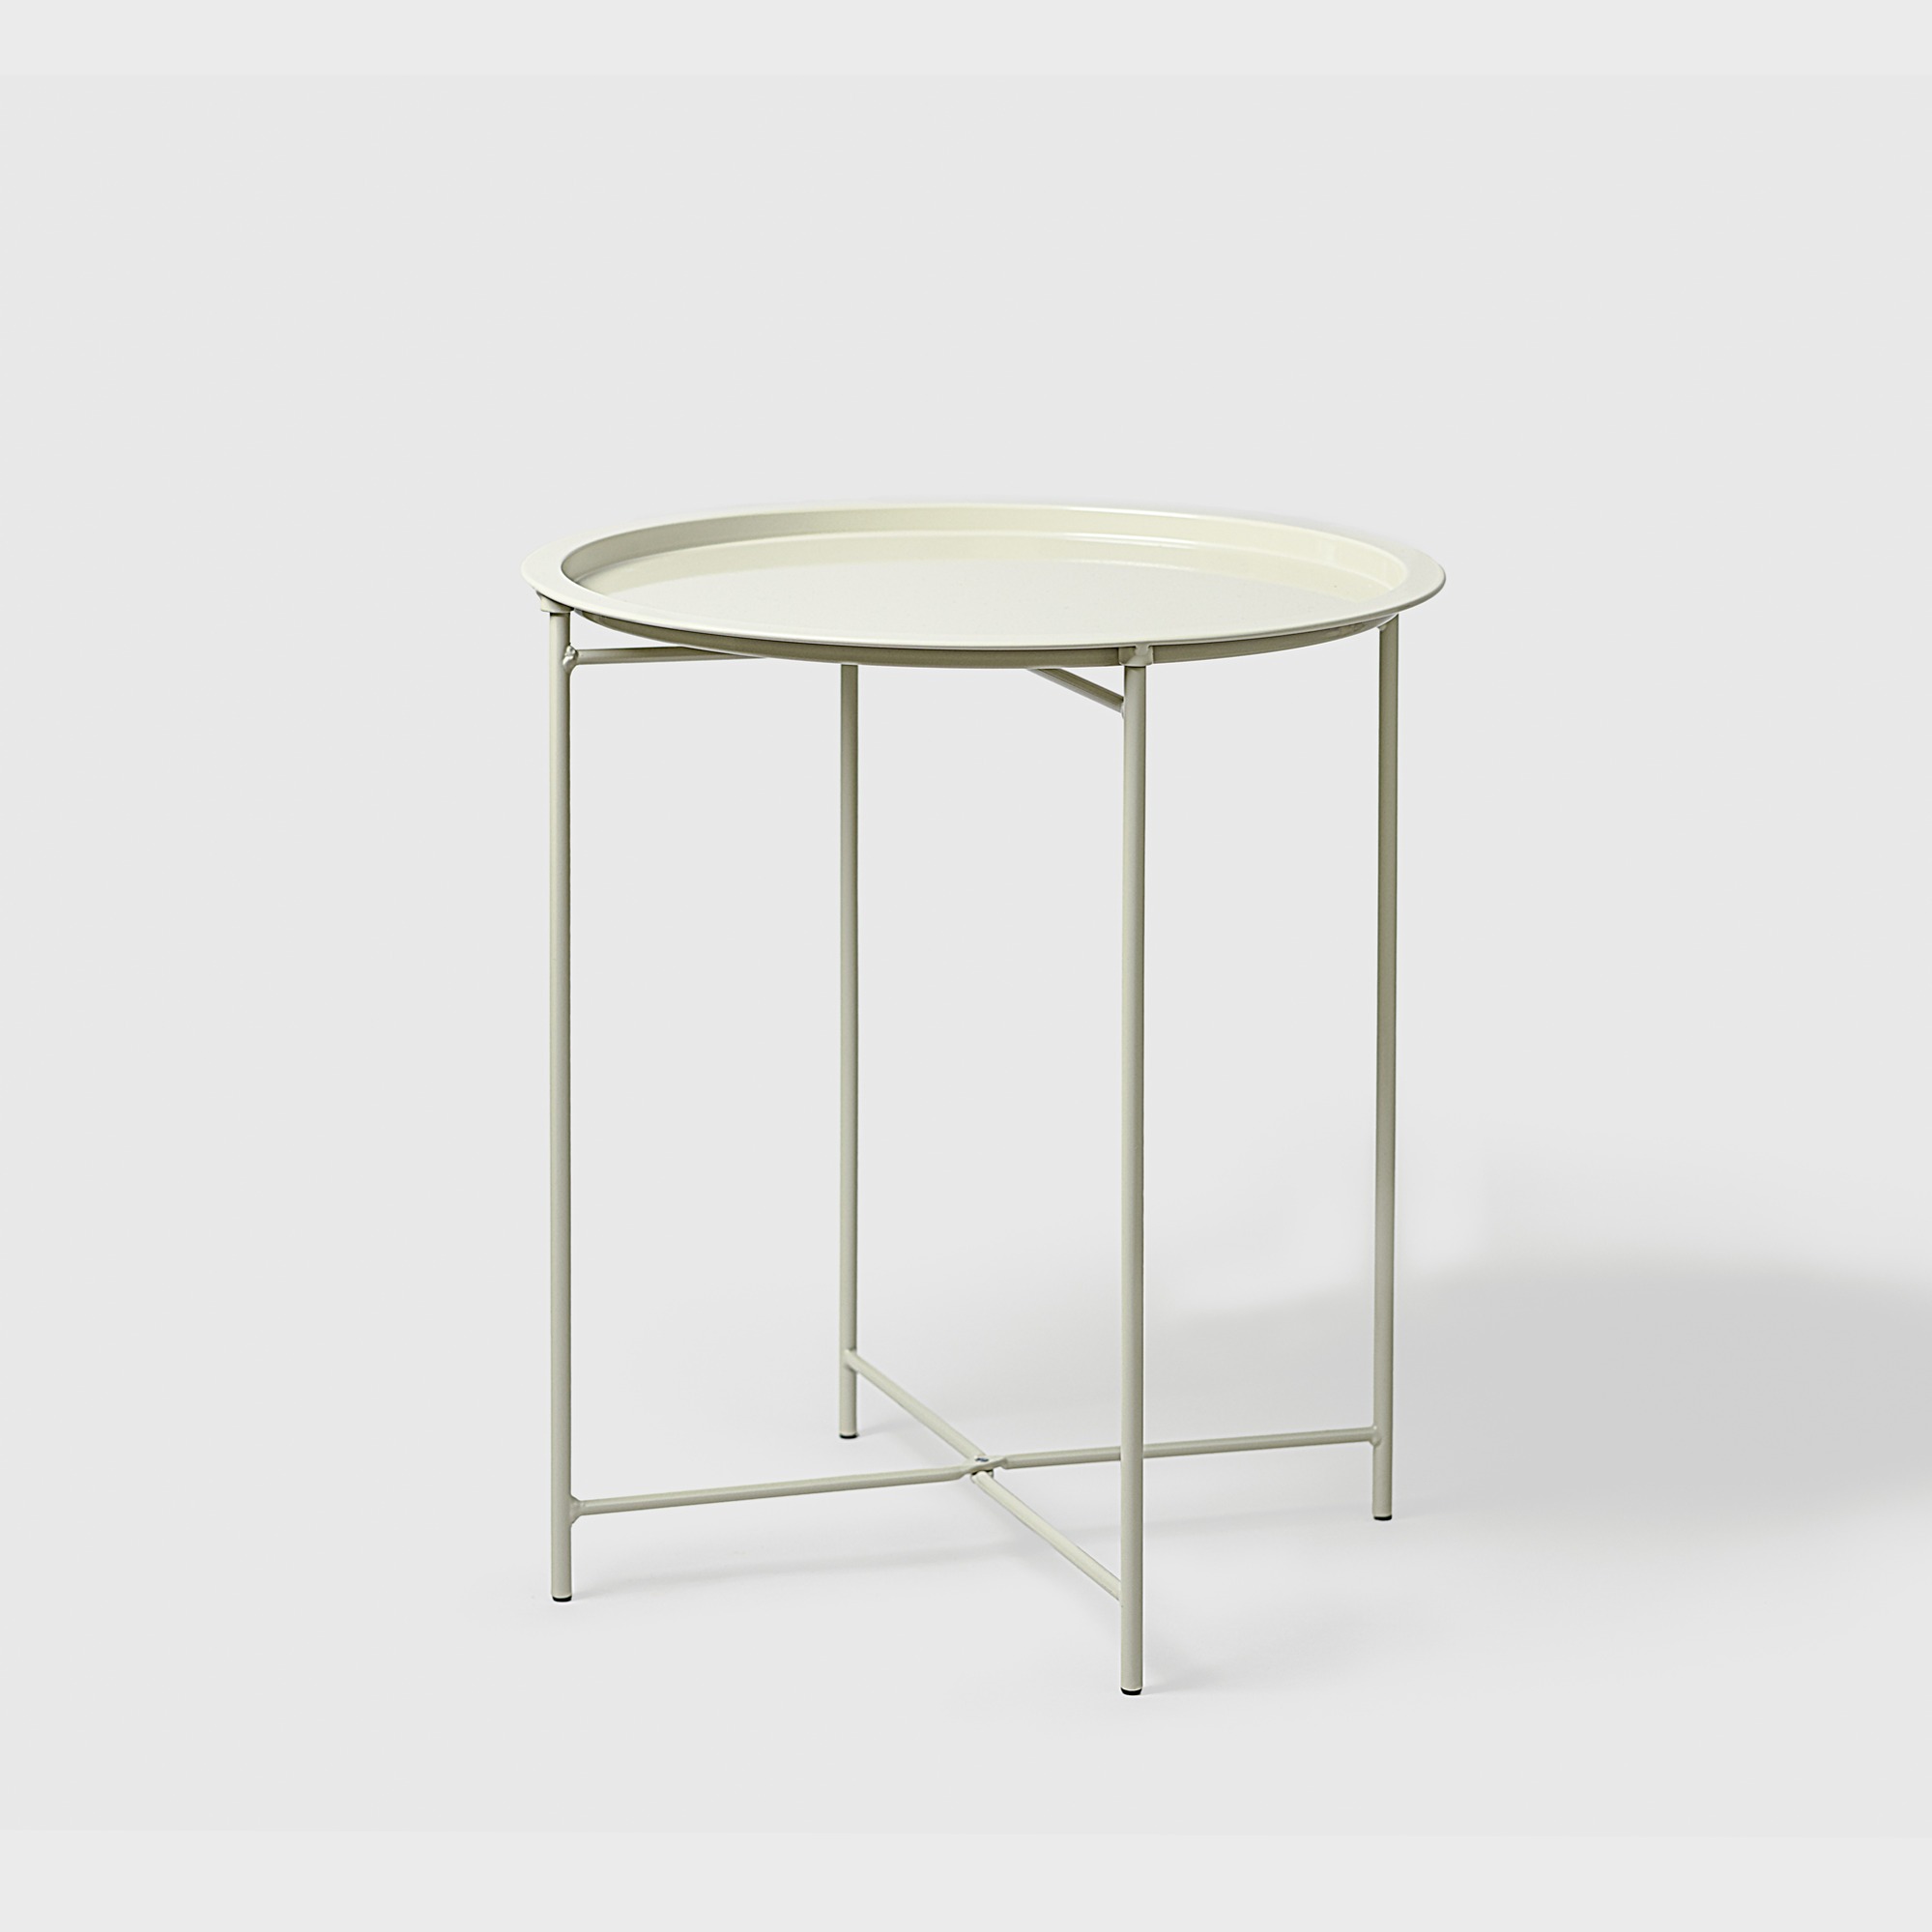 Garden Trading Rive Droite Bistro Tray Table in Clay Steel